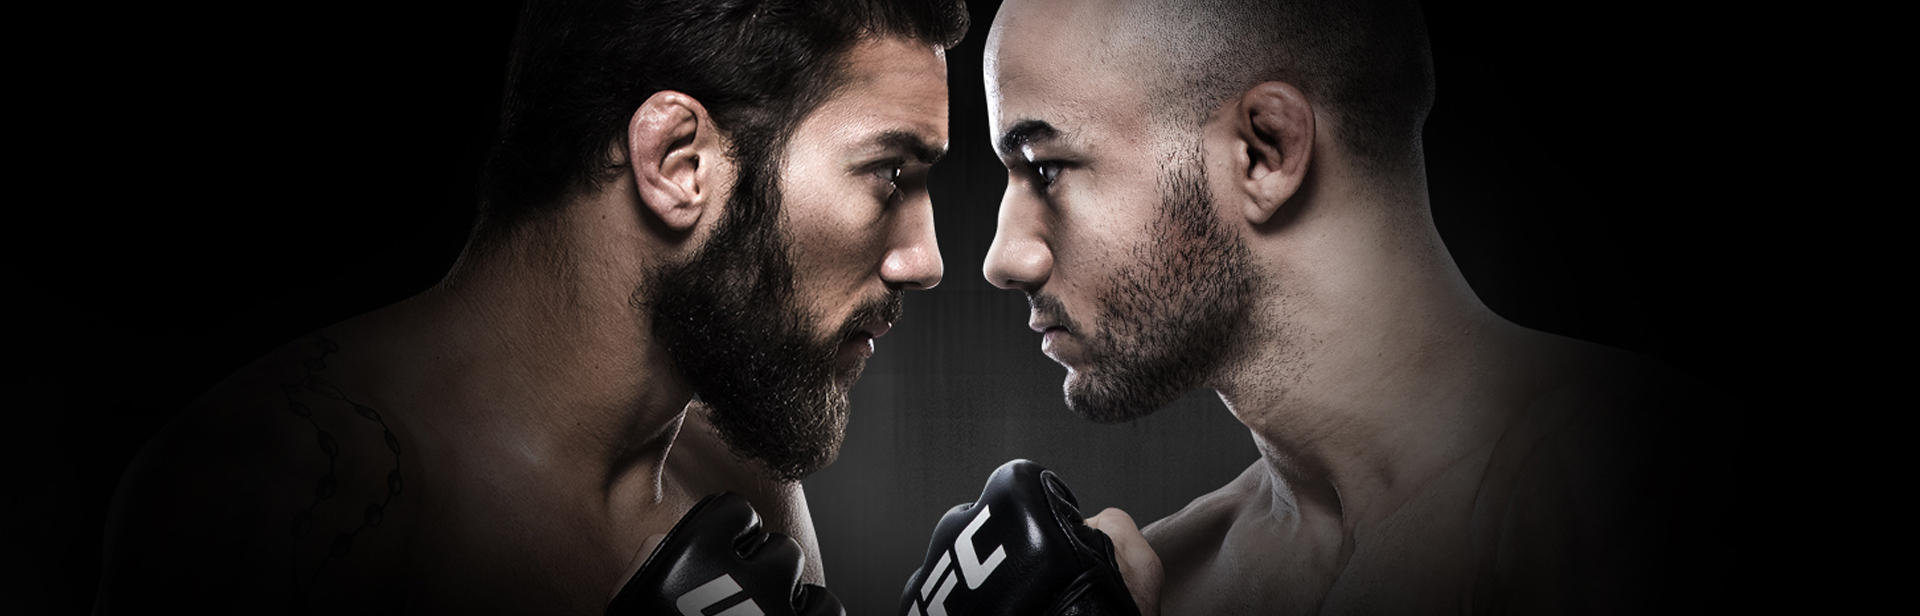 UFC: A summer of must-see fights